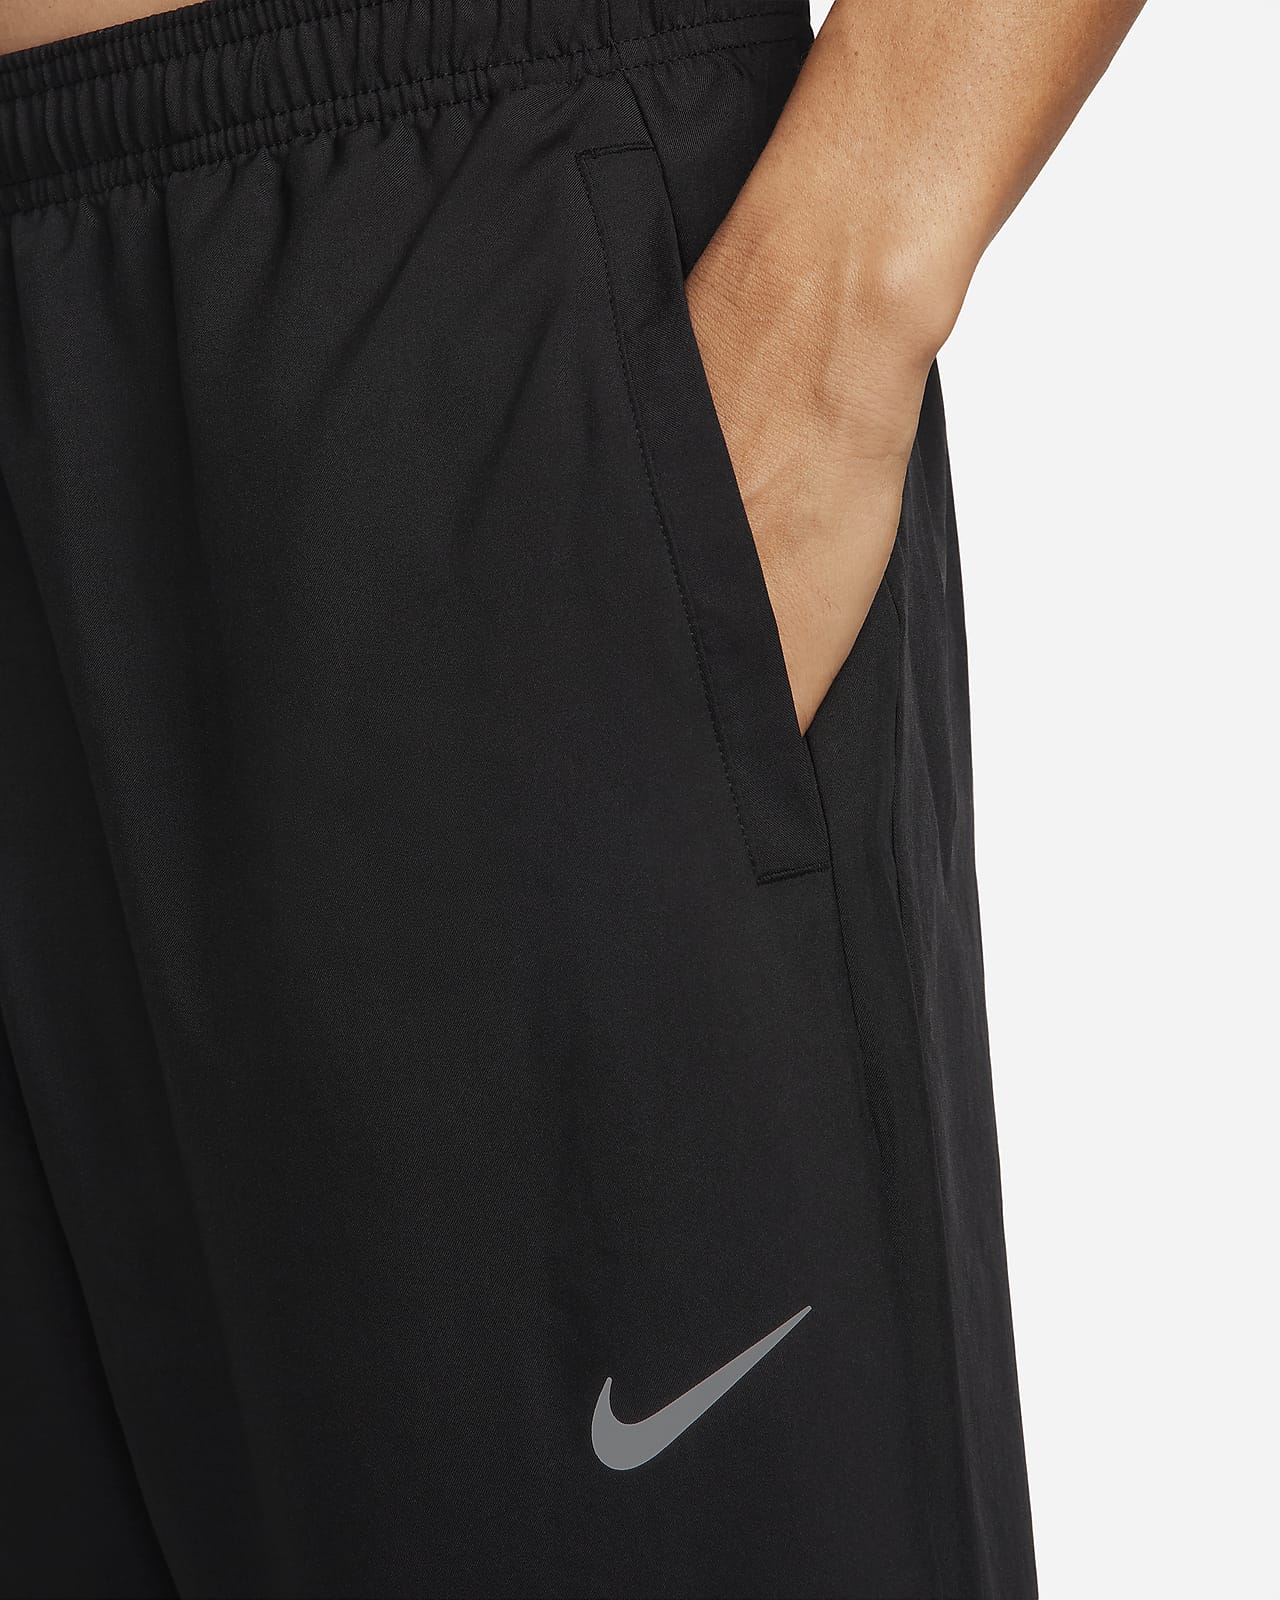 Nike Running Challenger Dri-FIT woven joggers in black